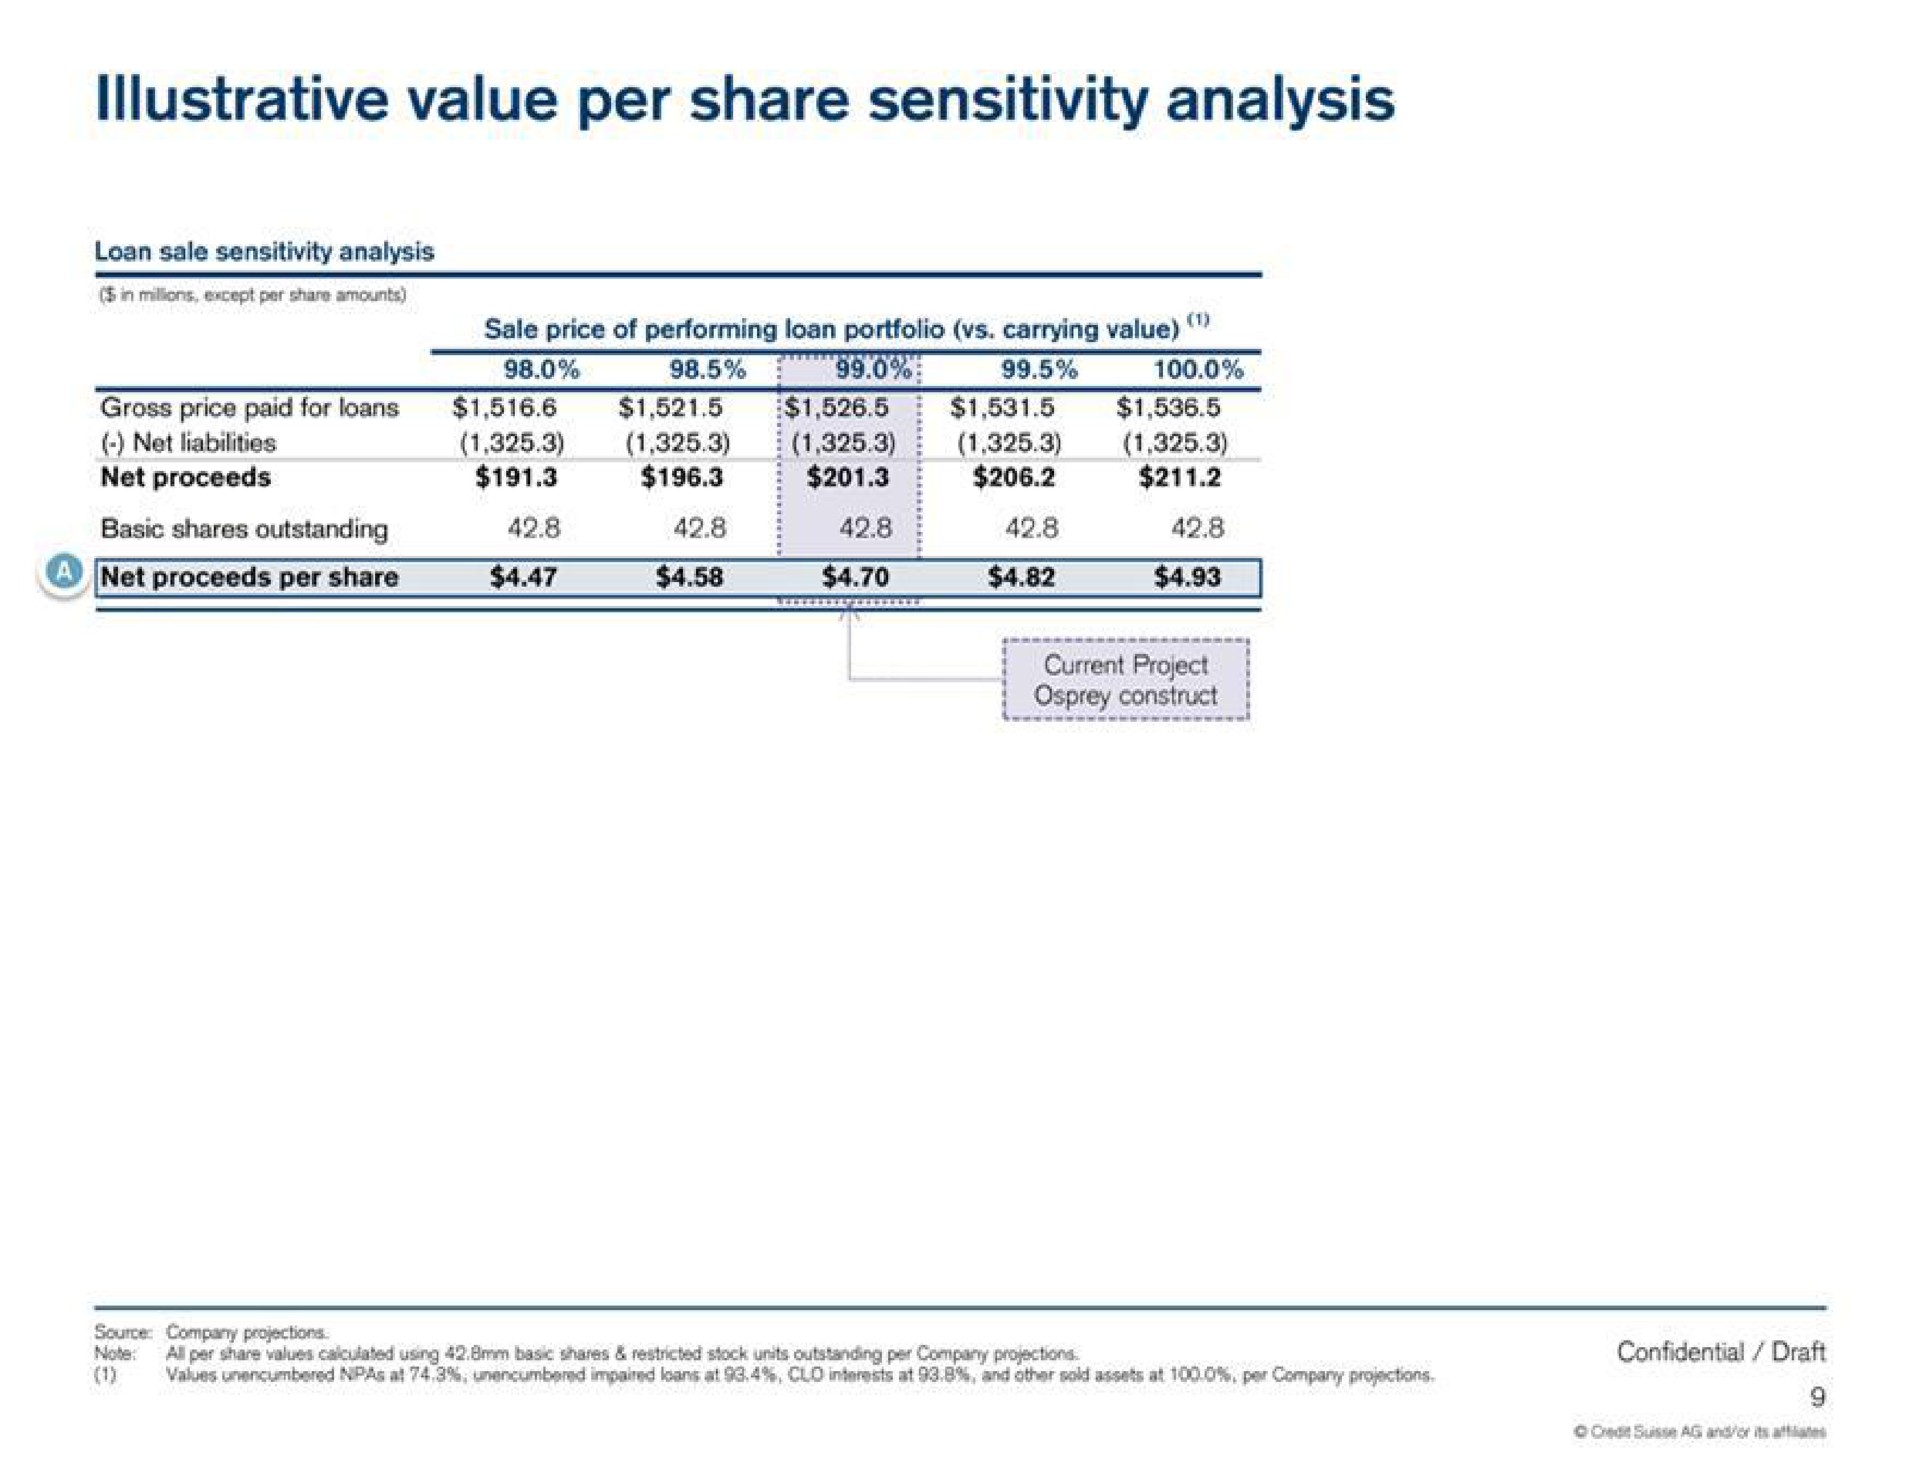 illustrative value per share sensitivity analysis net liabilities net proceeds basic shares outstanding i | Credit Suisse